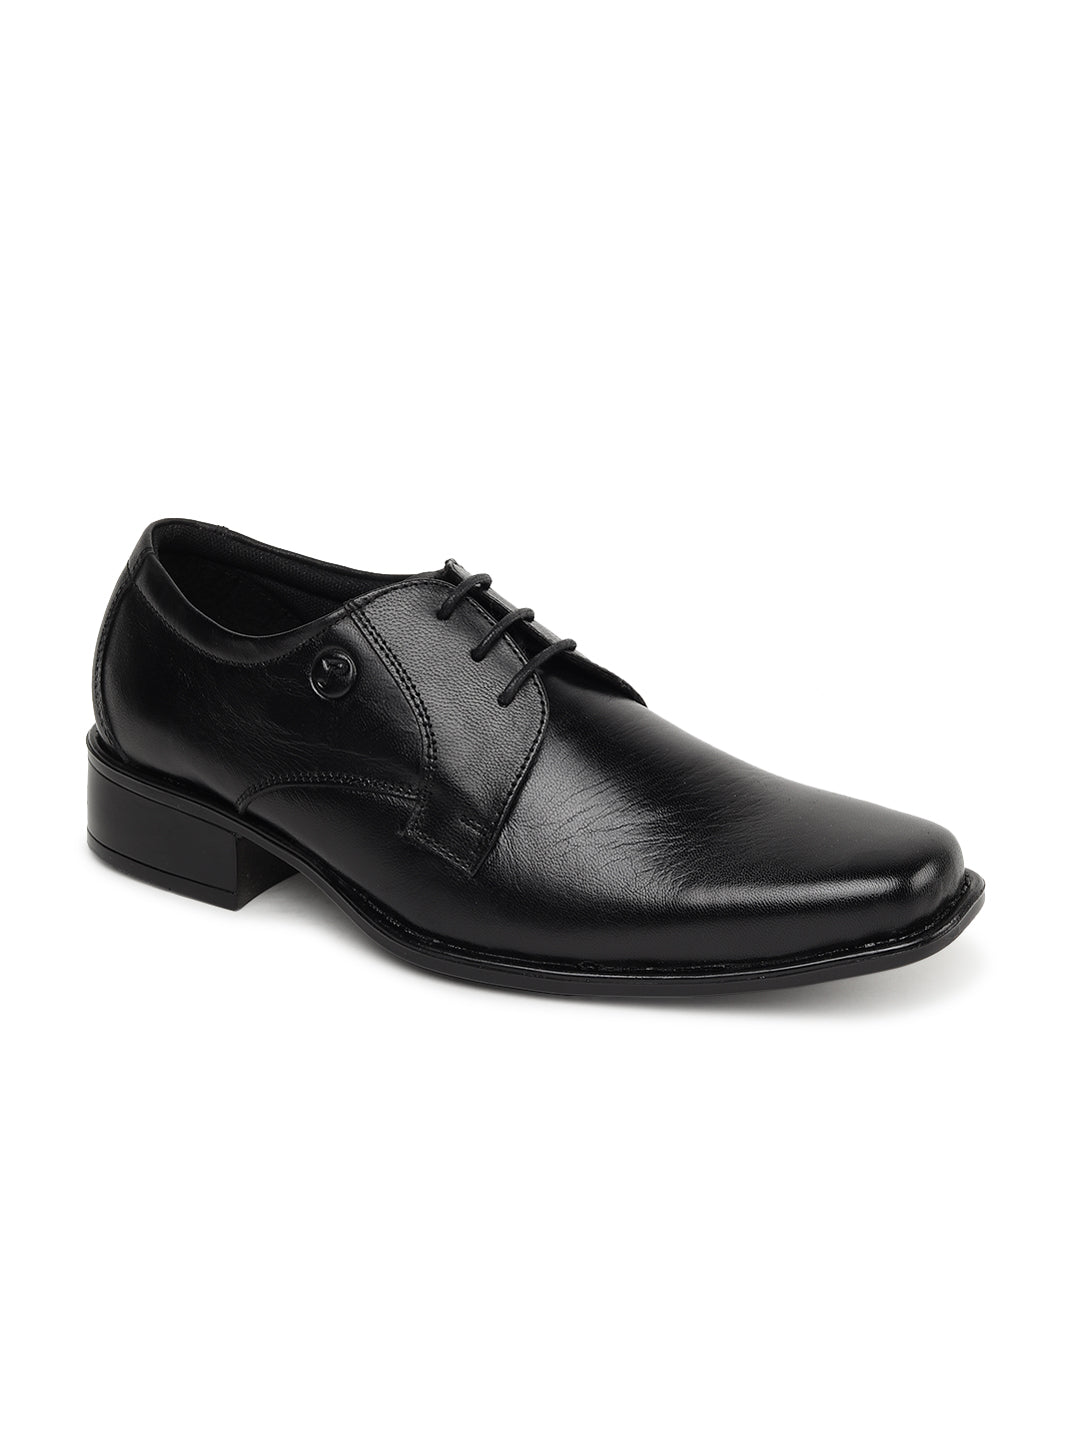 Paragon R11227G Men Formal Shoes | Corporate Office Shoes | Smart &amp; Sleek Design | Comfortable Sole with Cushioning | Daily &amp; Occasion Wear